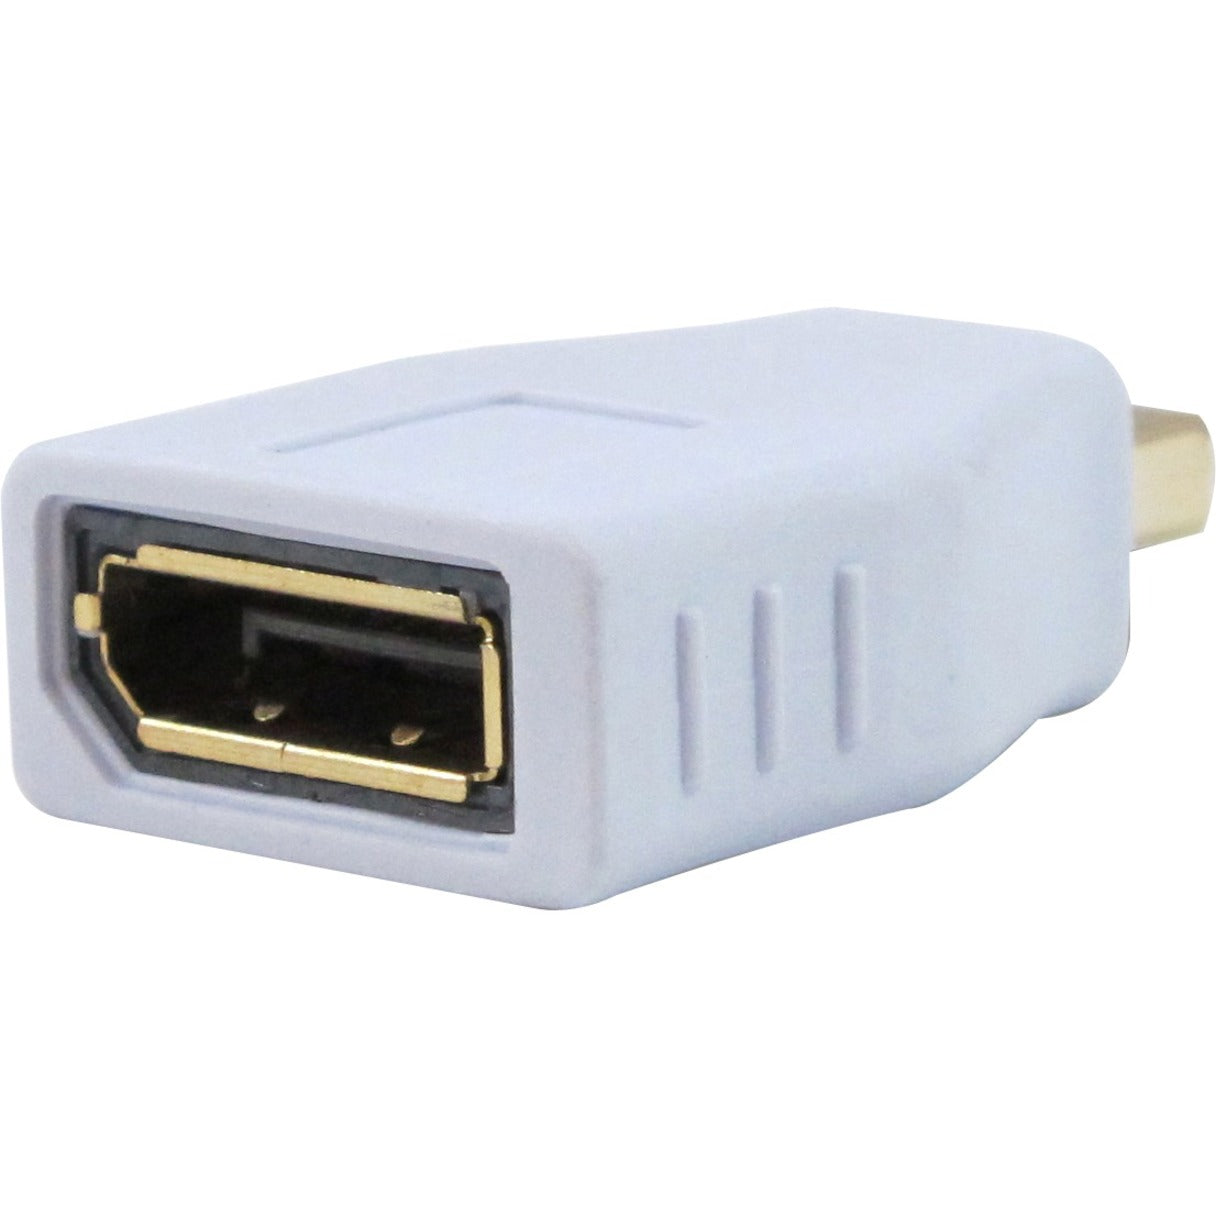 Comprehensive MDPM-DPF Mini DisplayPort Male to DisplayPort Female Adapter, Molded, Gold-Plated, 1920 x 1080 Resolution Supported